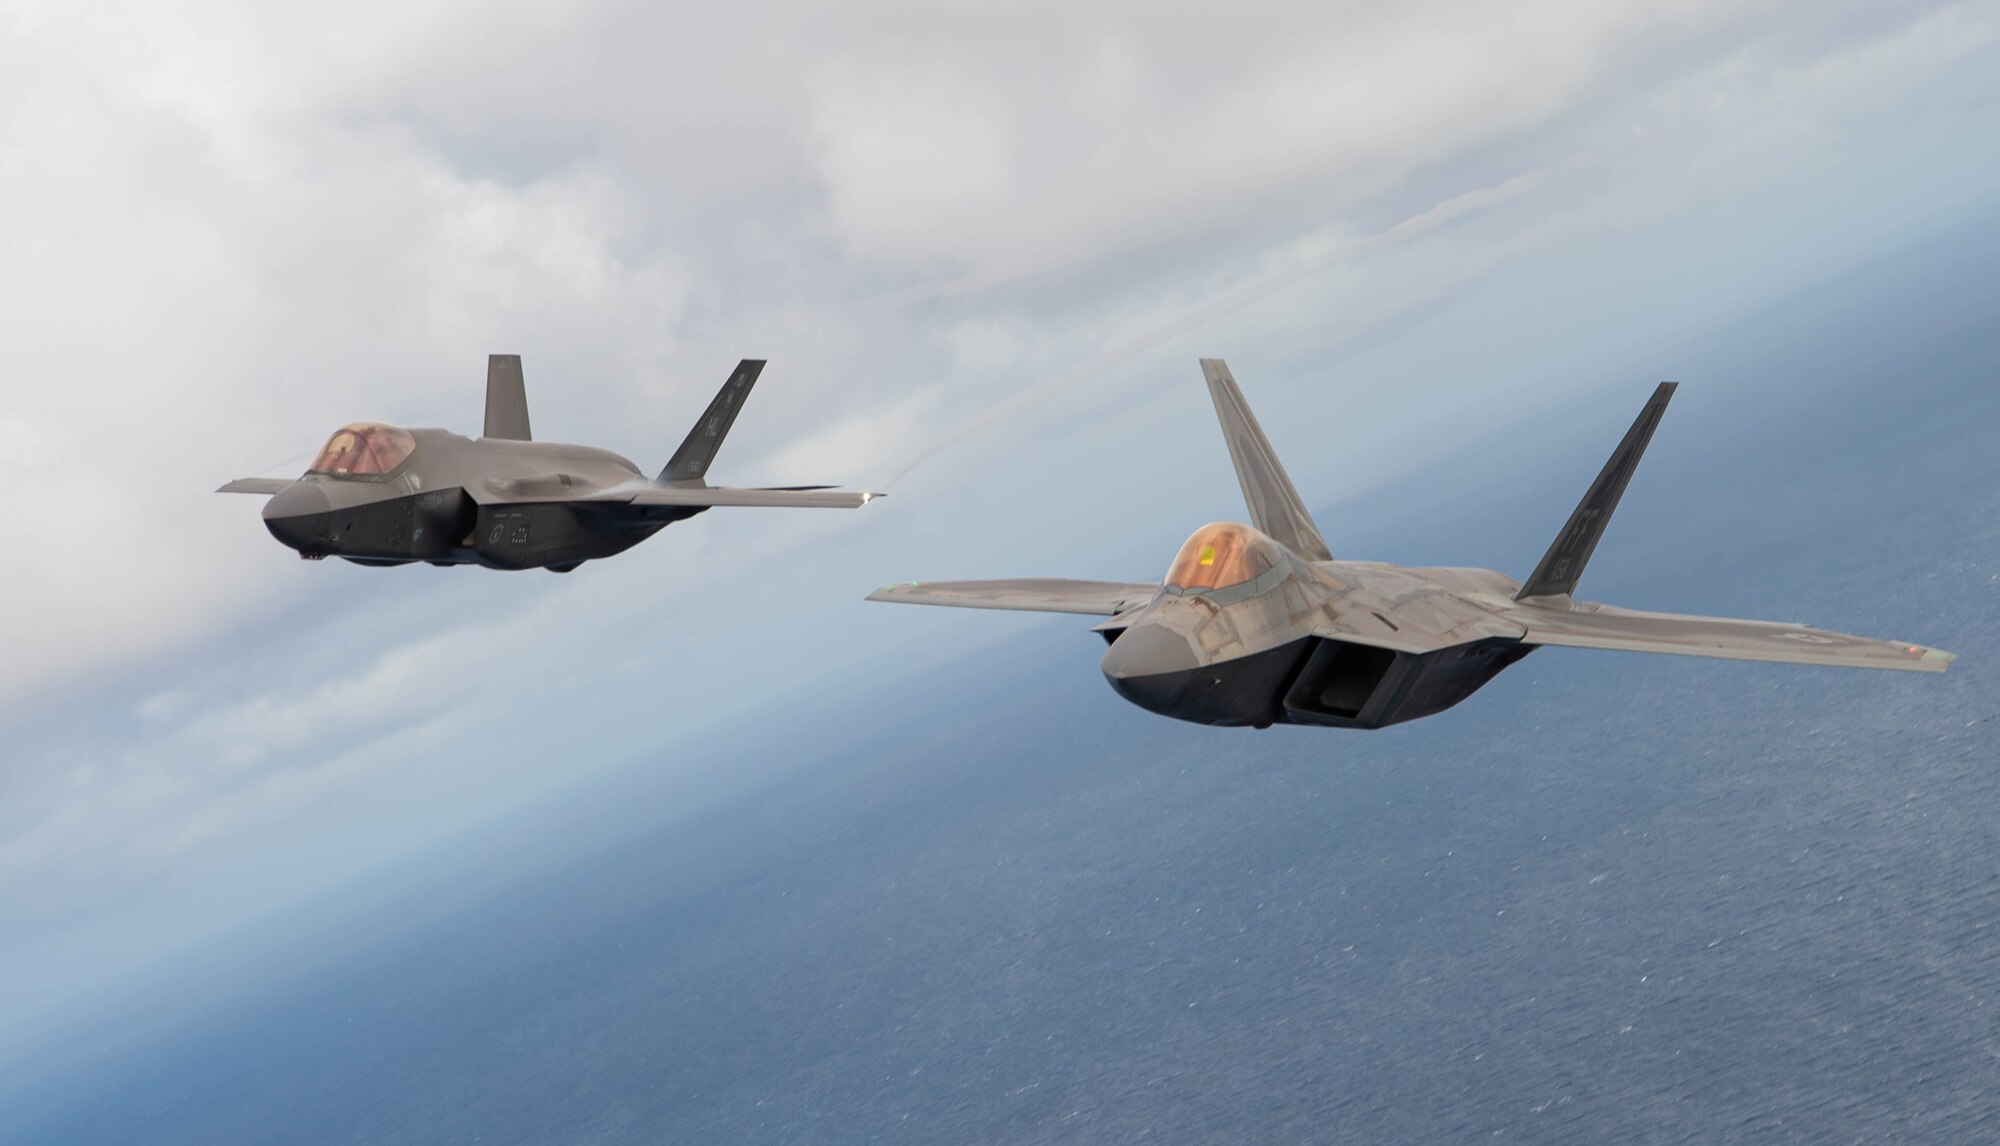 An F-22 Raptor and F-35A Lightning II fly in formation near Fort Lauderdale, Fla., Nov. 20, 2020. The fighter jets, along with the C-17 West Coast Demo Team from Joint Base Lewis-McChord, Wash., participated in the two-day 2020 Fort Lauderdale Air Show. (U.S. Air Force photo by Senior Airman Tryphena Mayhugh)